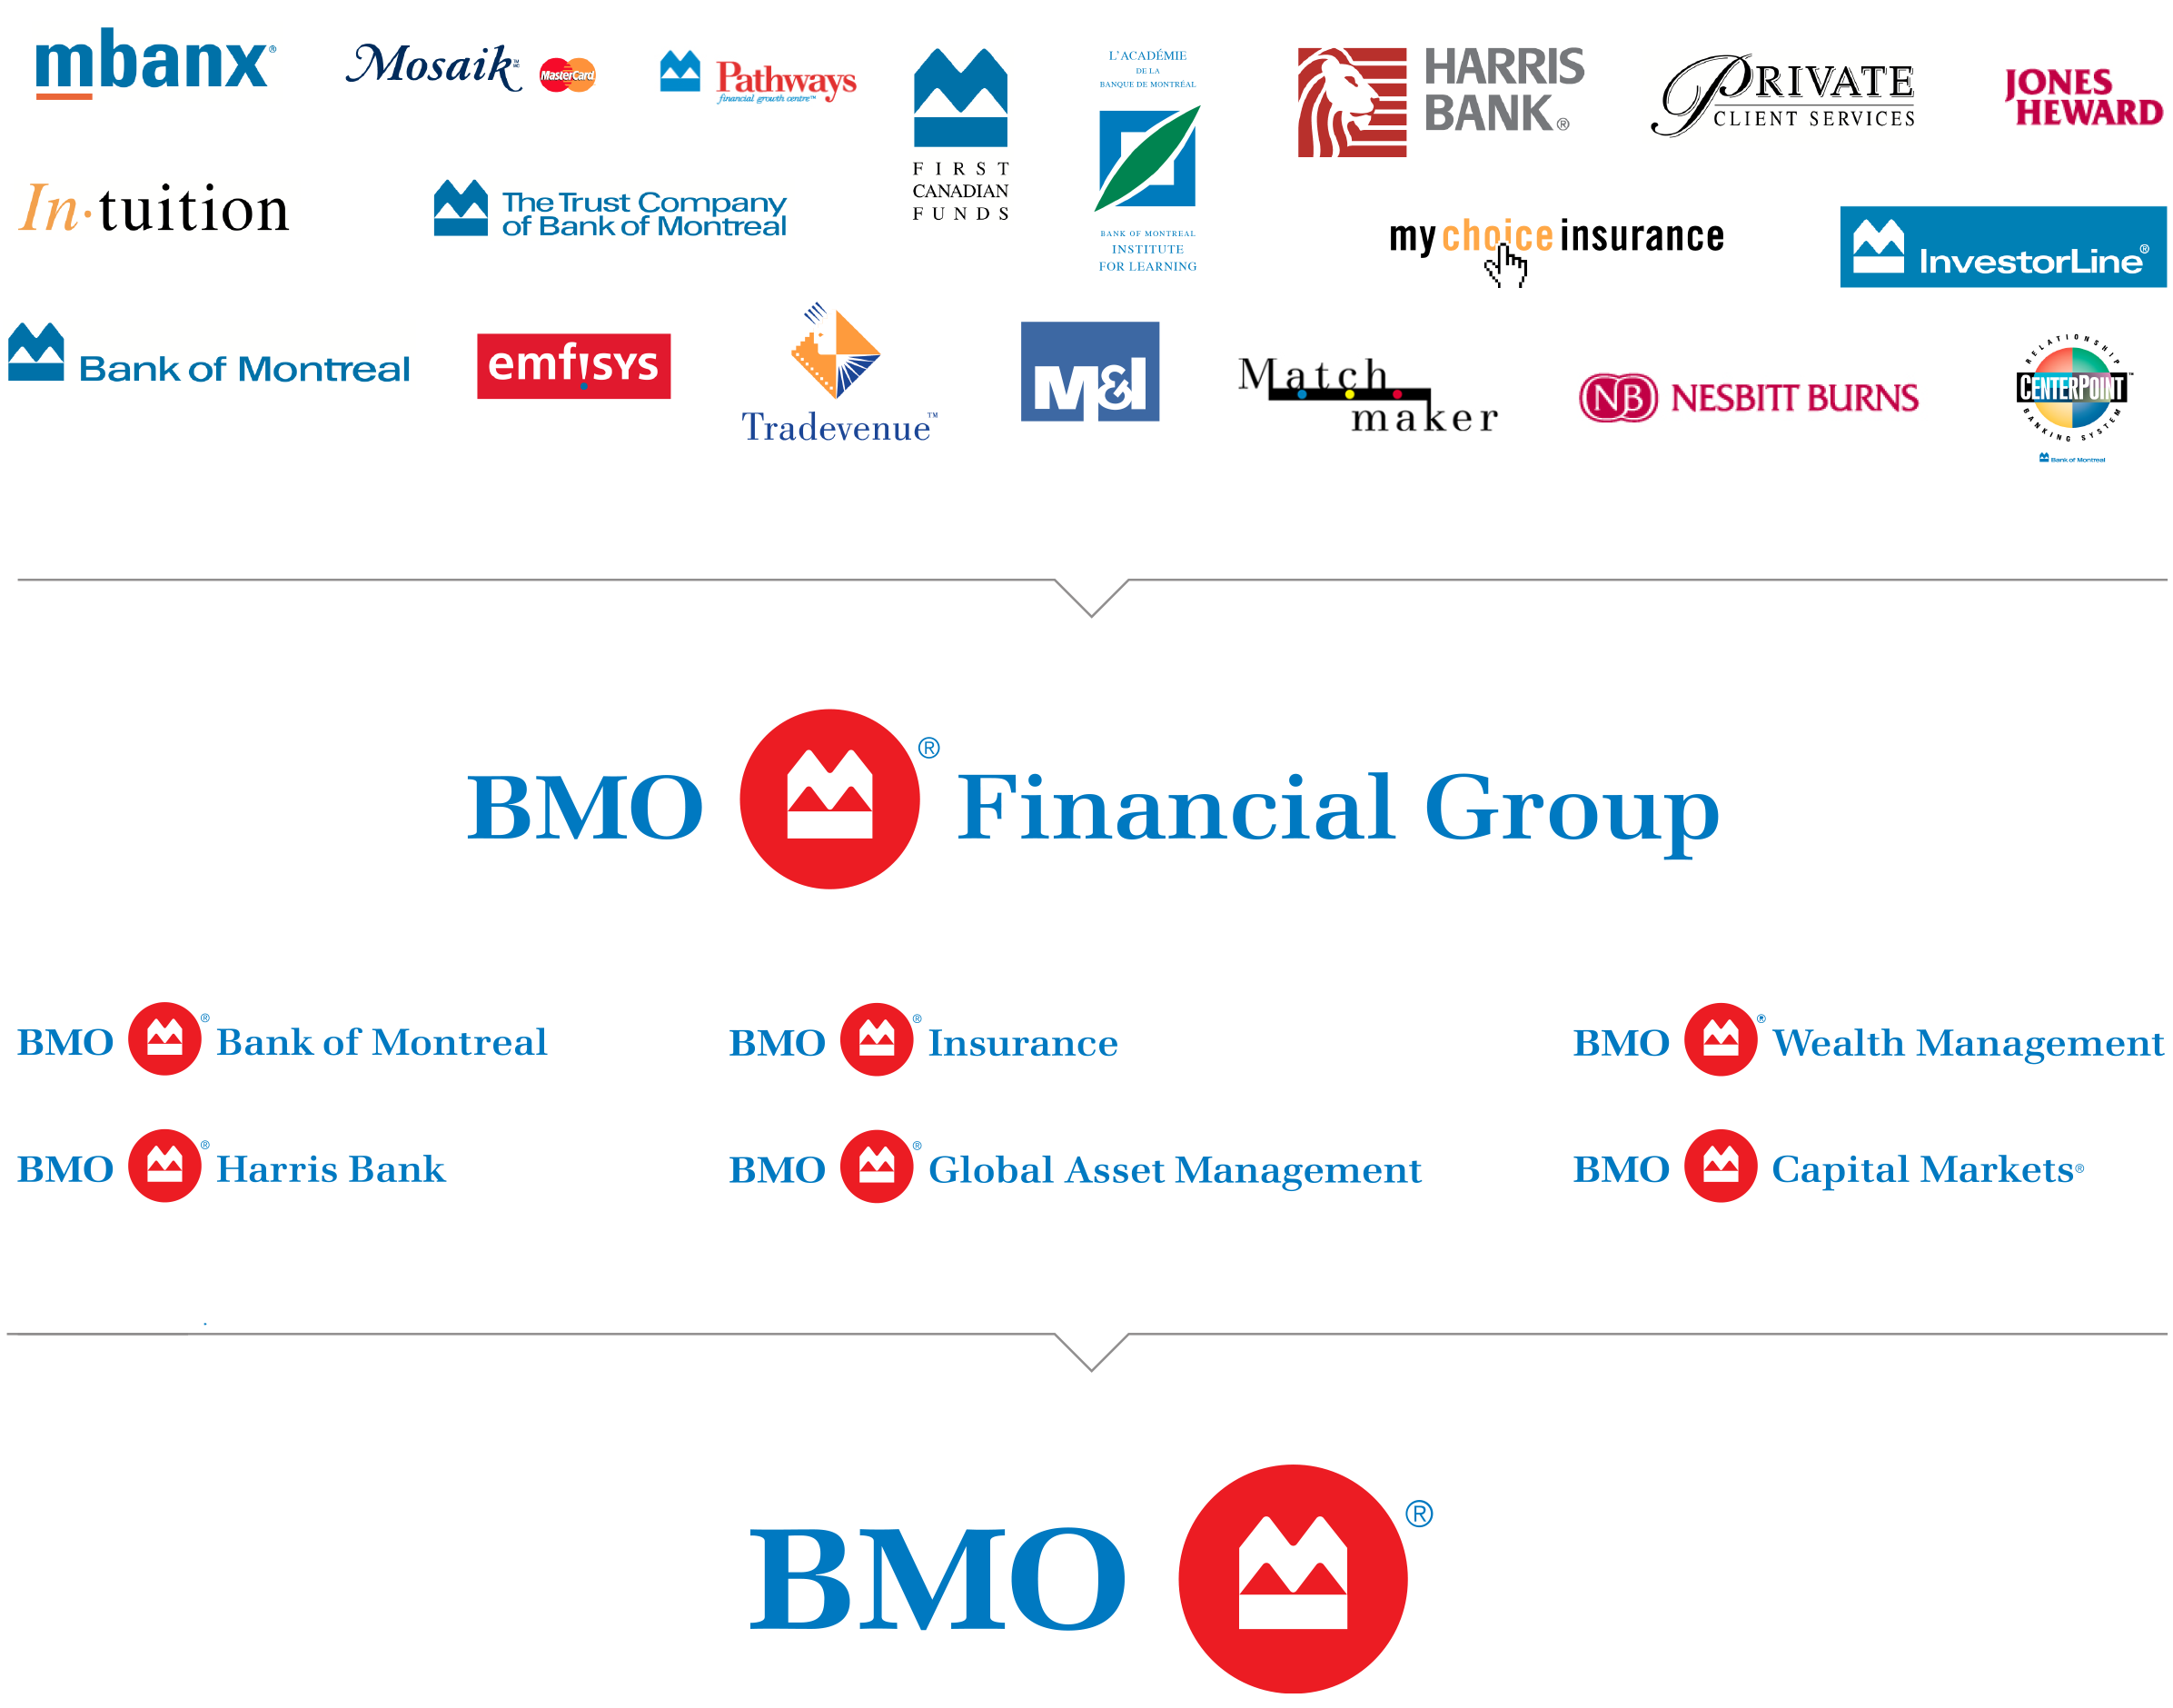 Many identities are shown including mbanx, M&I and Harris Bank, which transitioned to the BMO Financial Group logo and group of BMO logos, which then transitioned into the BMO logo alone.